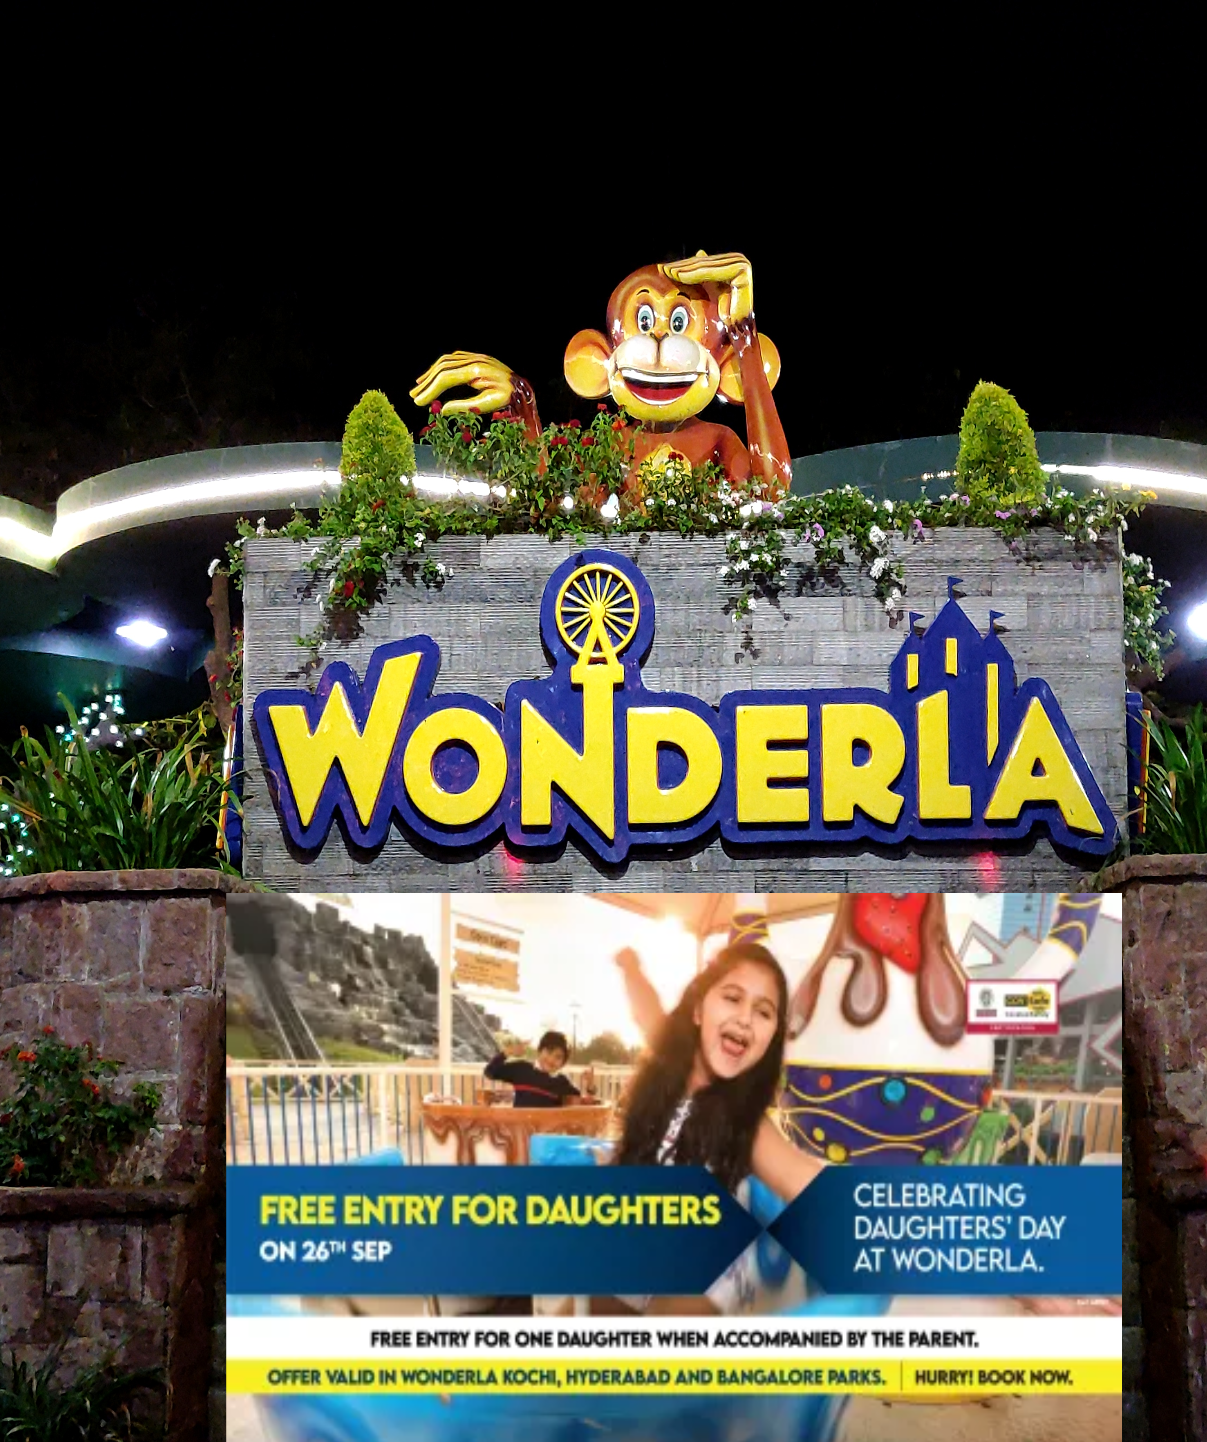 Wonderla offers free park entry to all daughters, this Daughters Day